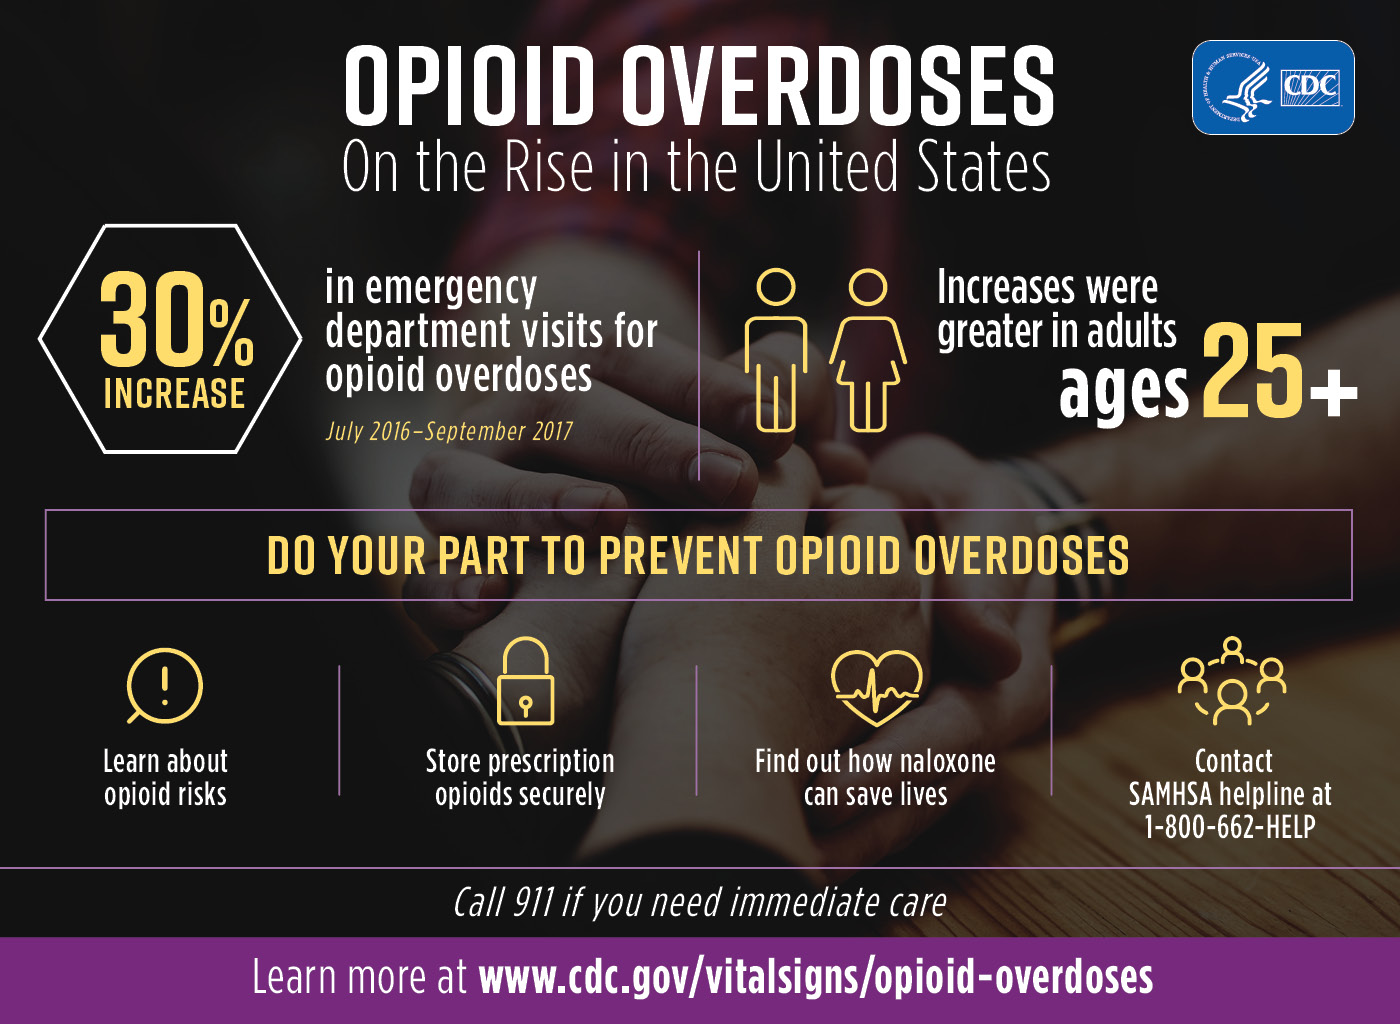 Do your part to prevent opioid overdoses, learn about the risks, store Rx's safely, find out about naloxone and contact SAMHSA helpline